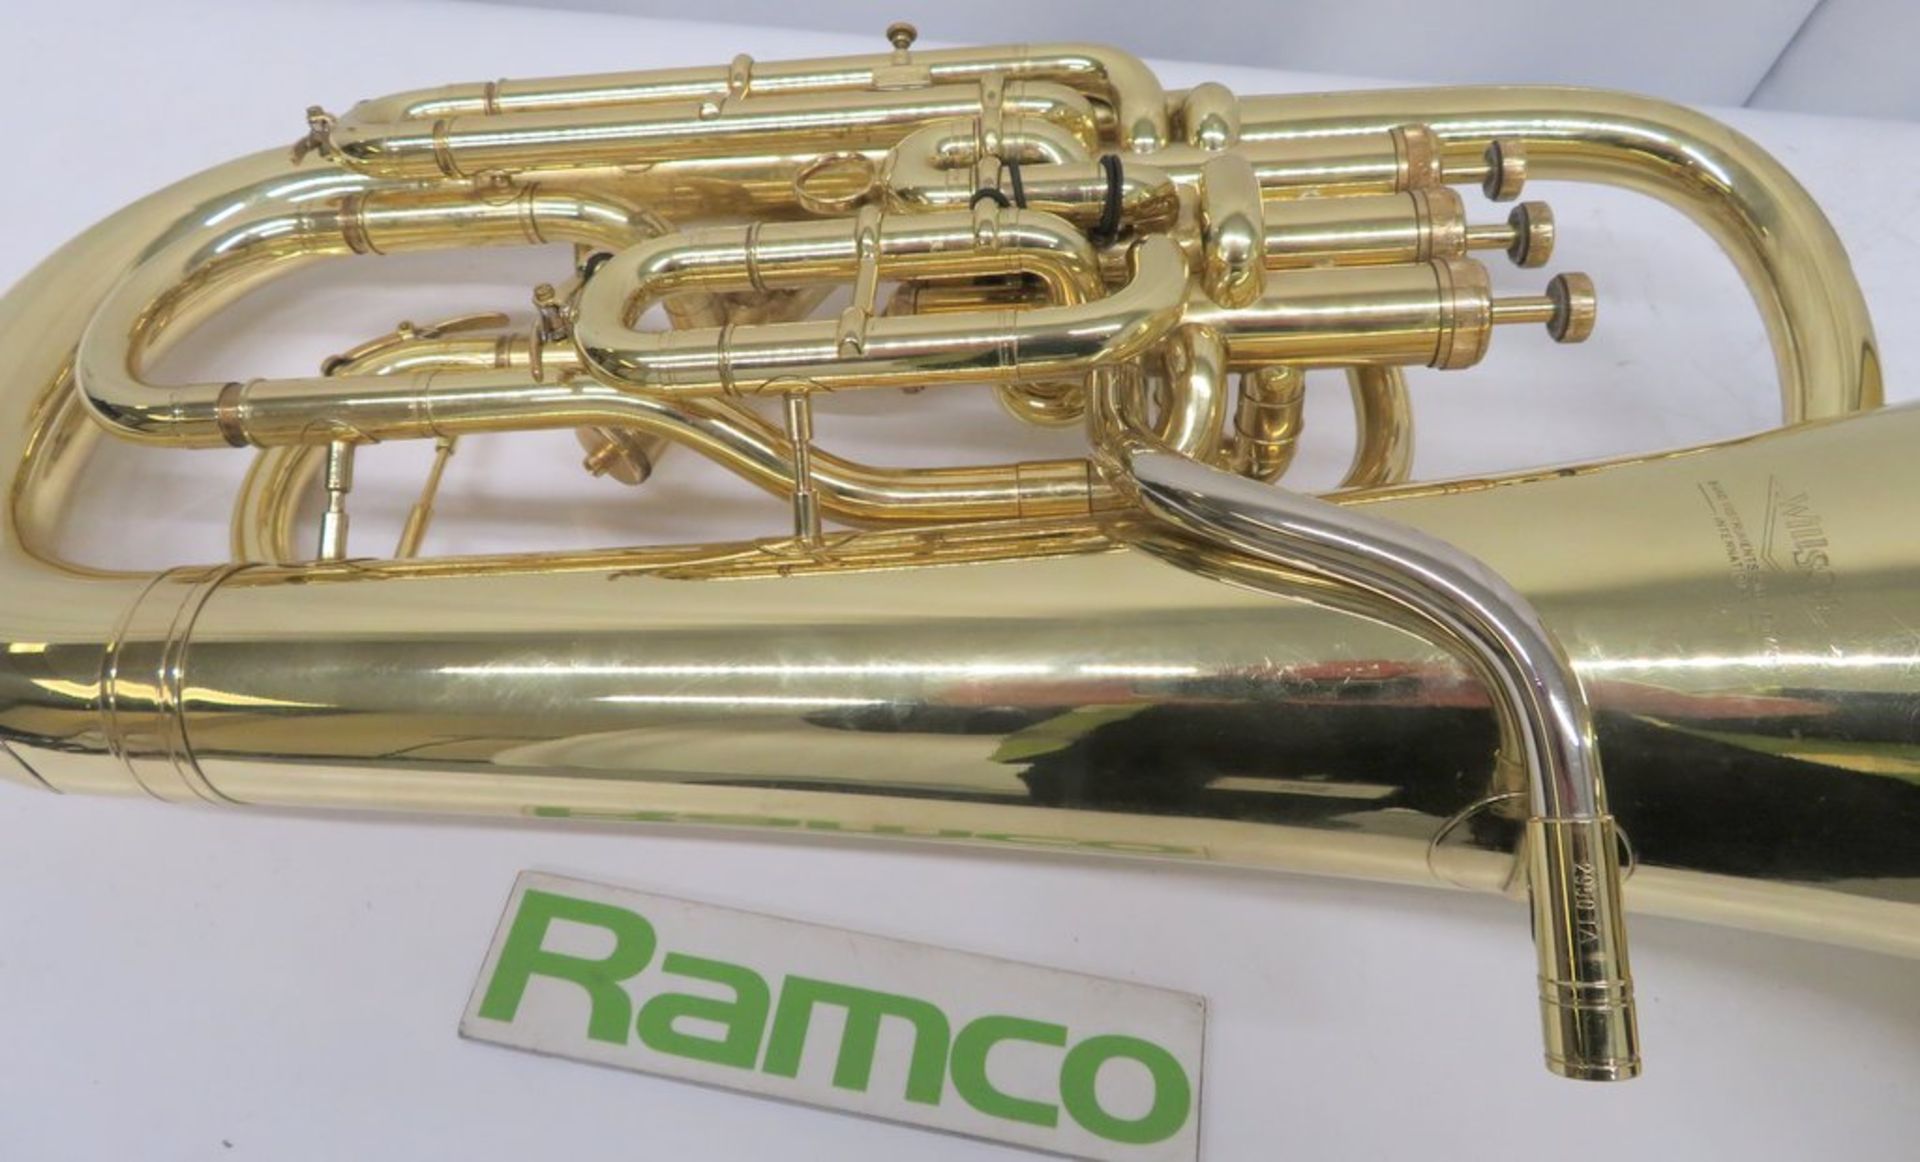 Wilson Euphonium With Case. Serial Number: 2950TA. Please Note This Item Has Not Been Test - Image 17 of 17